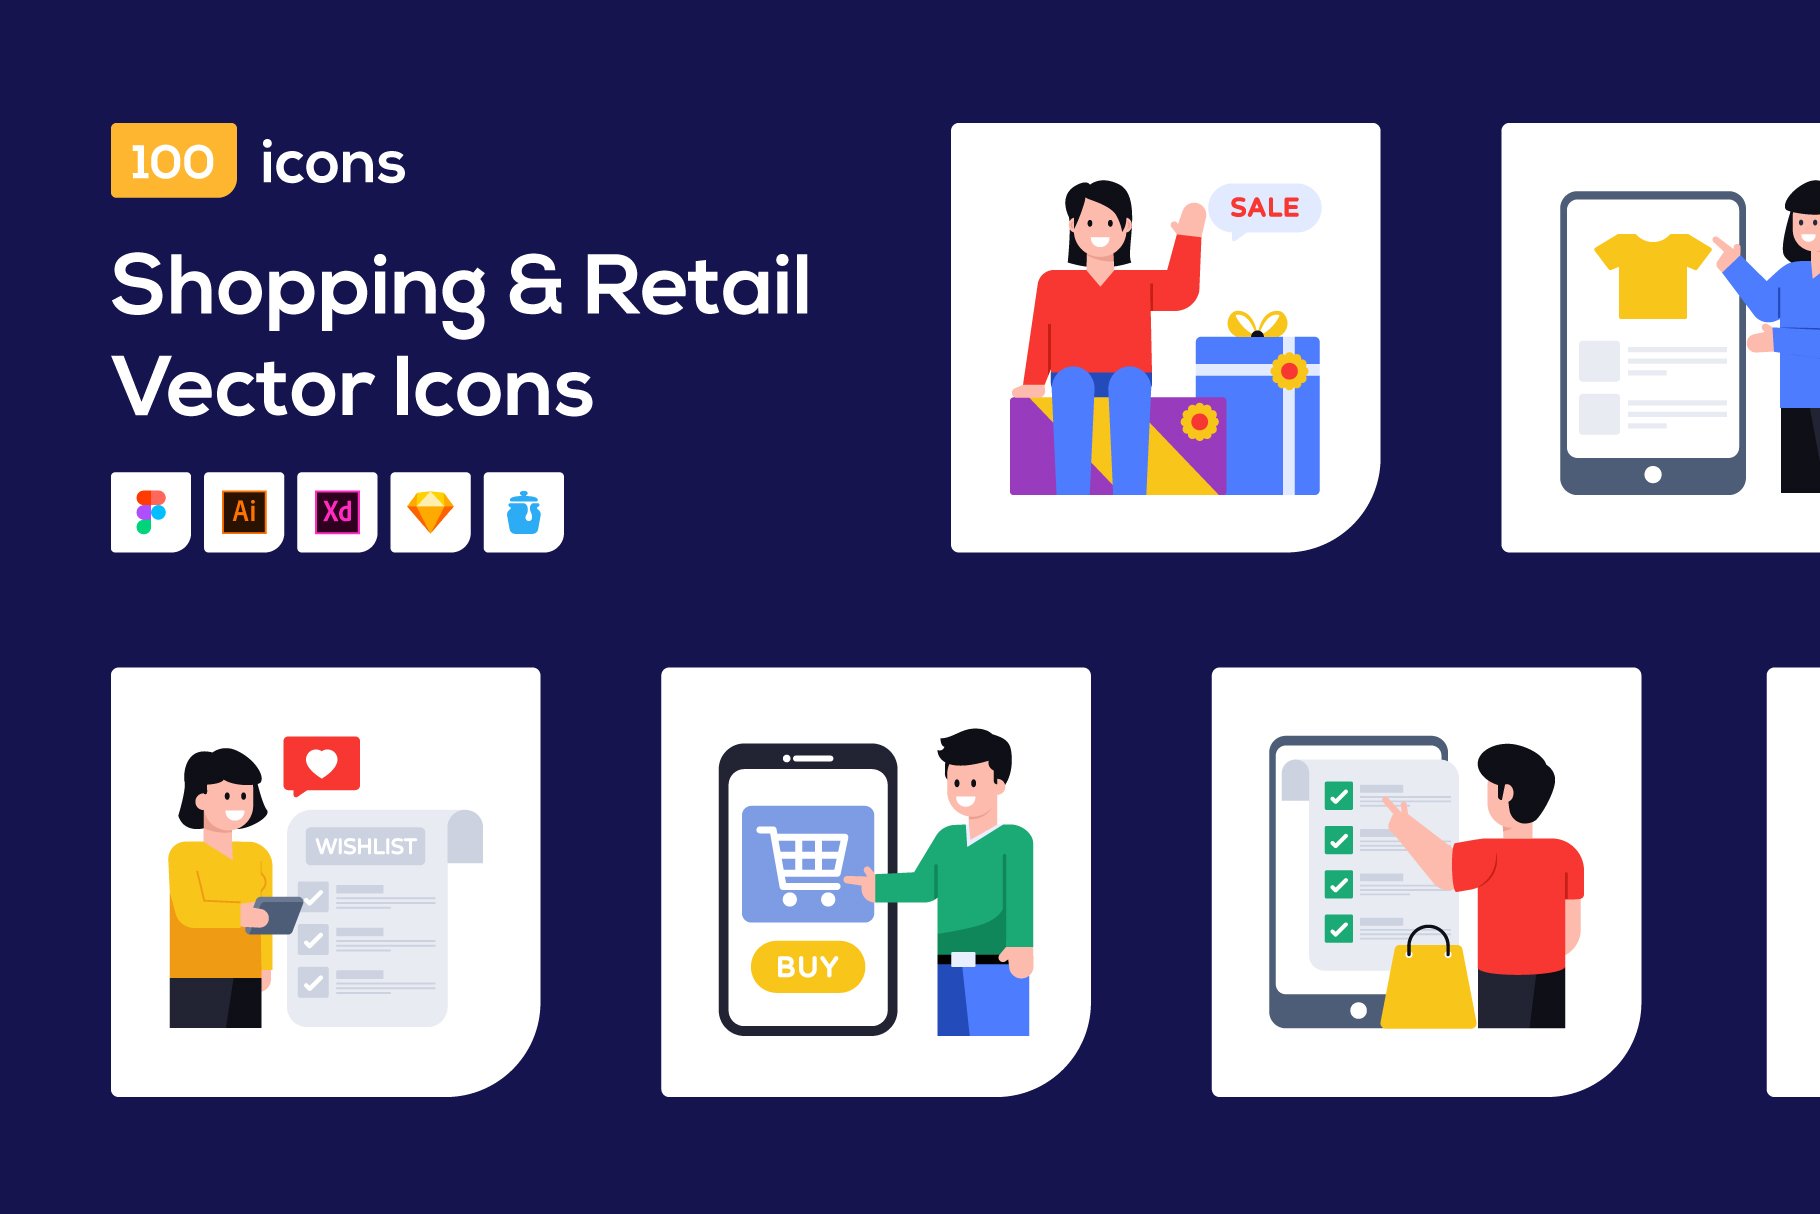 100 Shopping Character Vector Icons cover image.